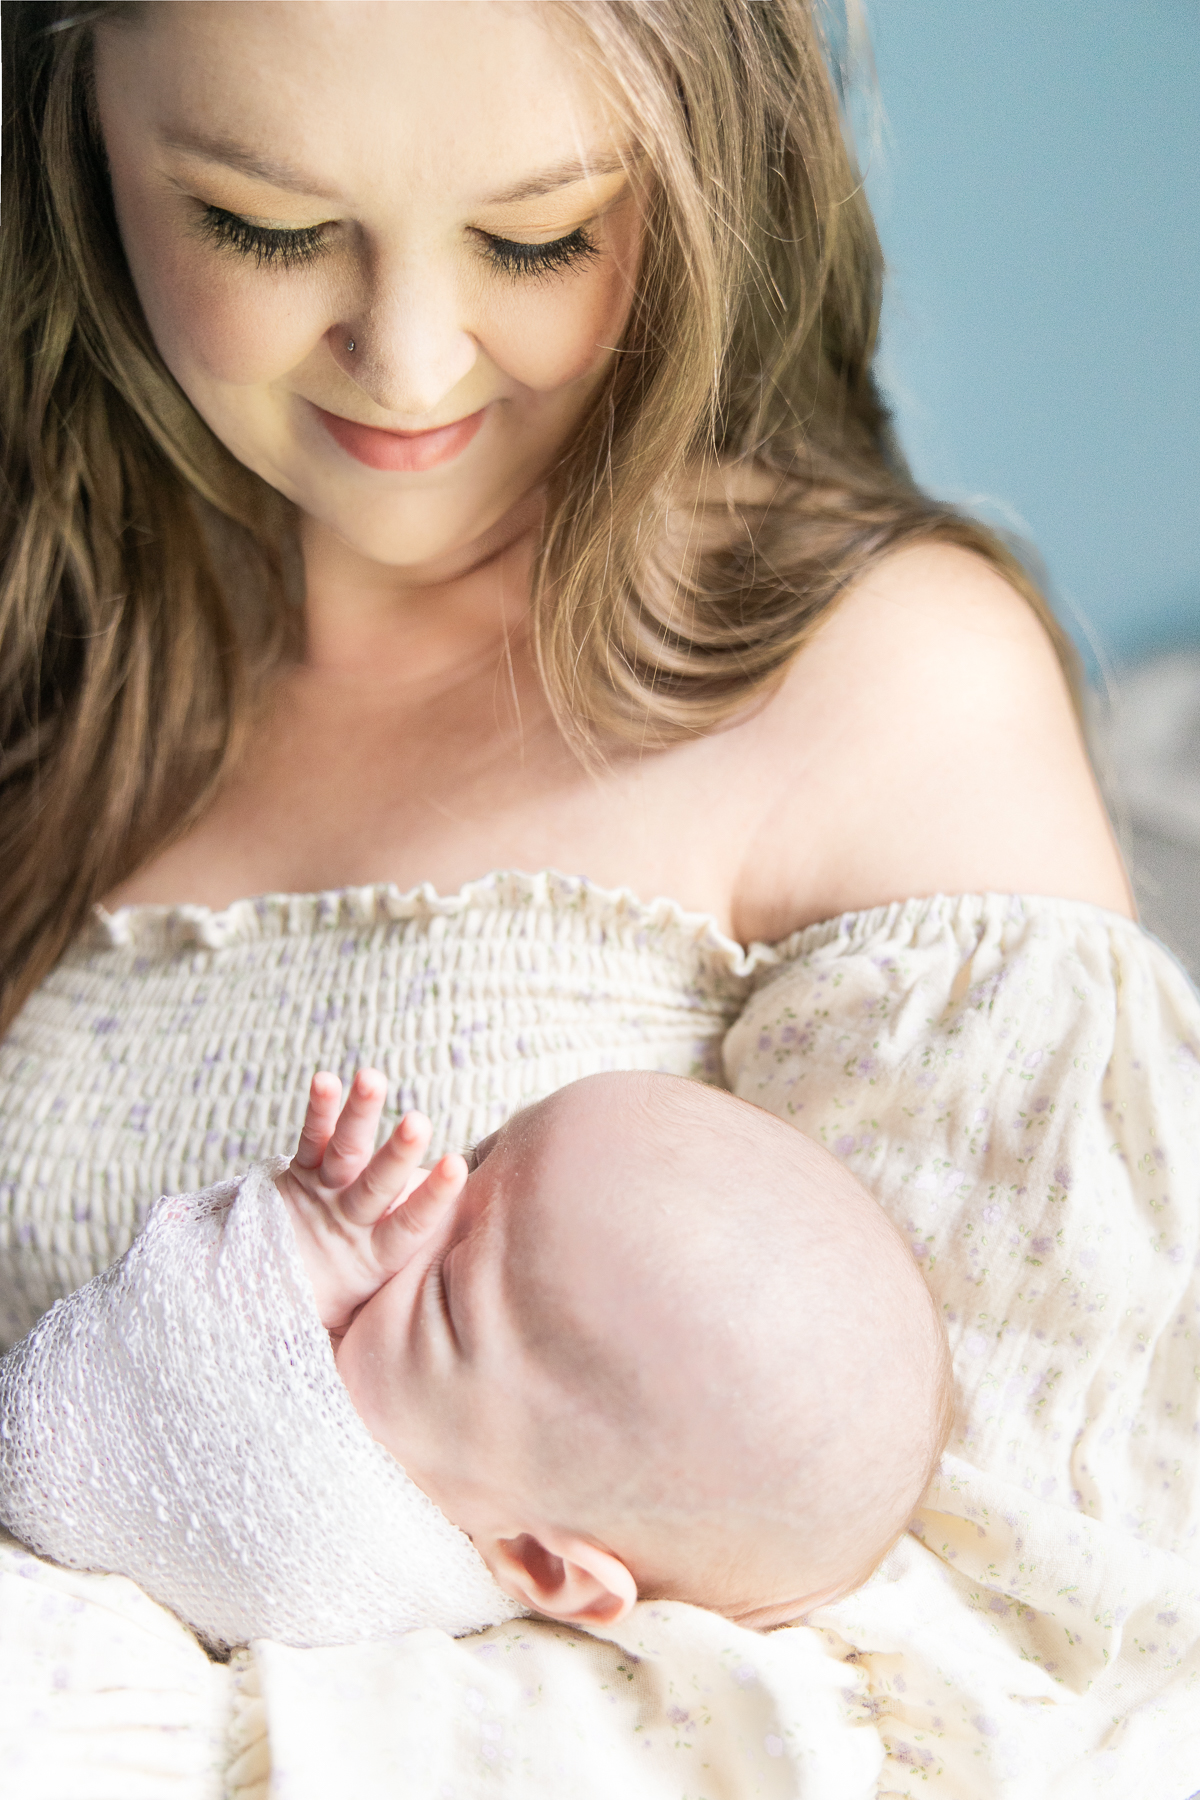 New mother looks down at the baby in her arms and smiles, Indianapolis lifestyle newborn photographer
